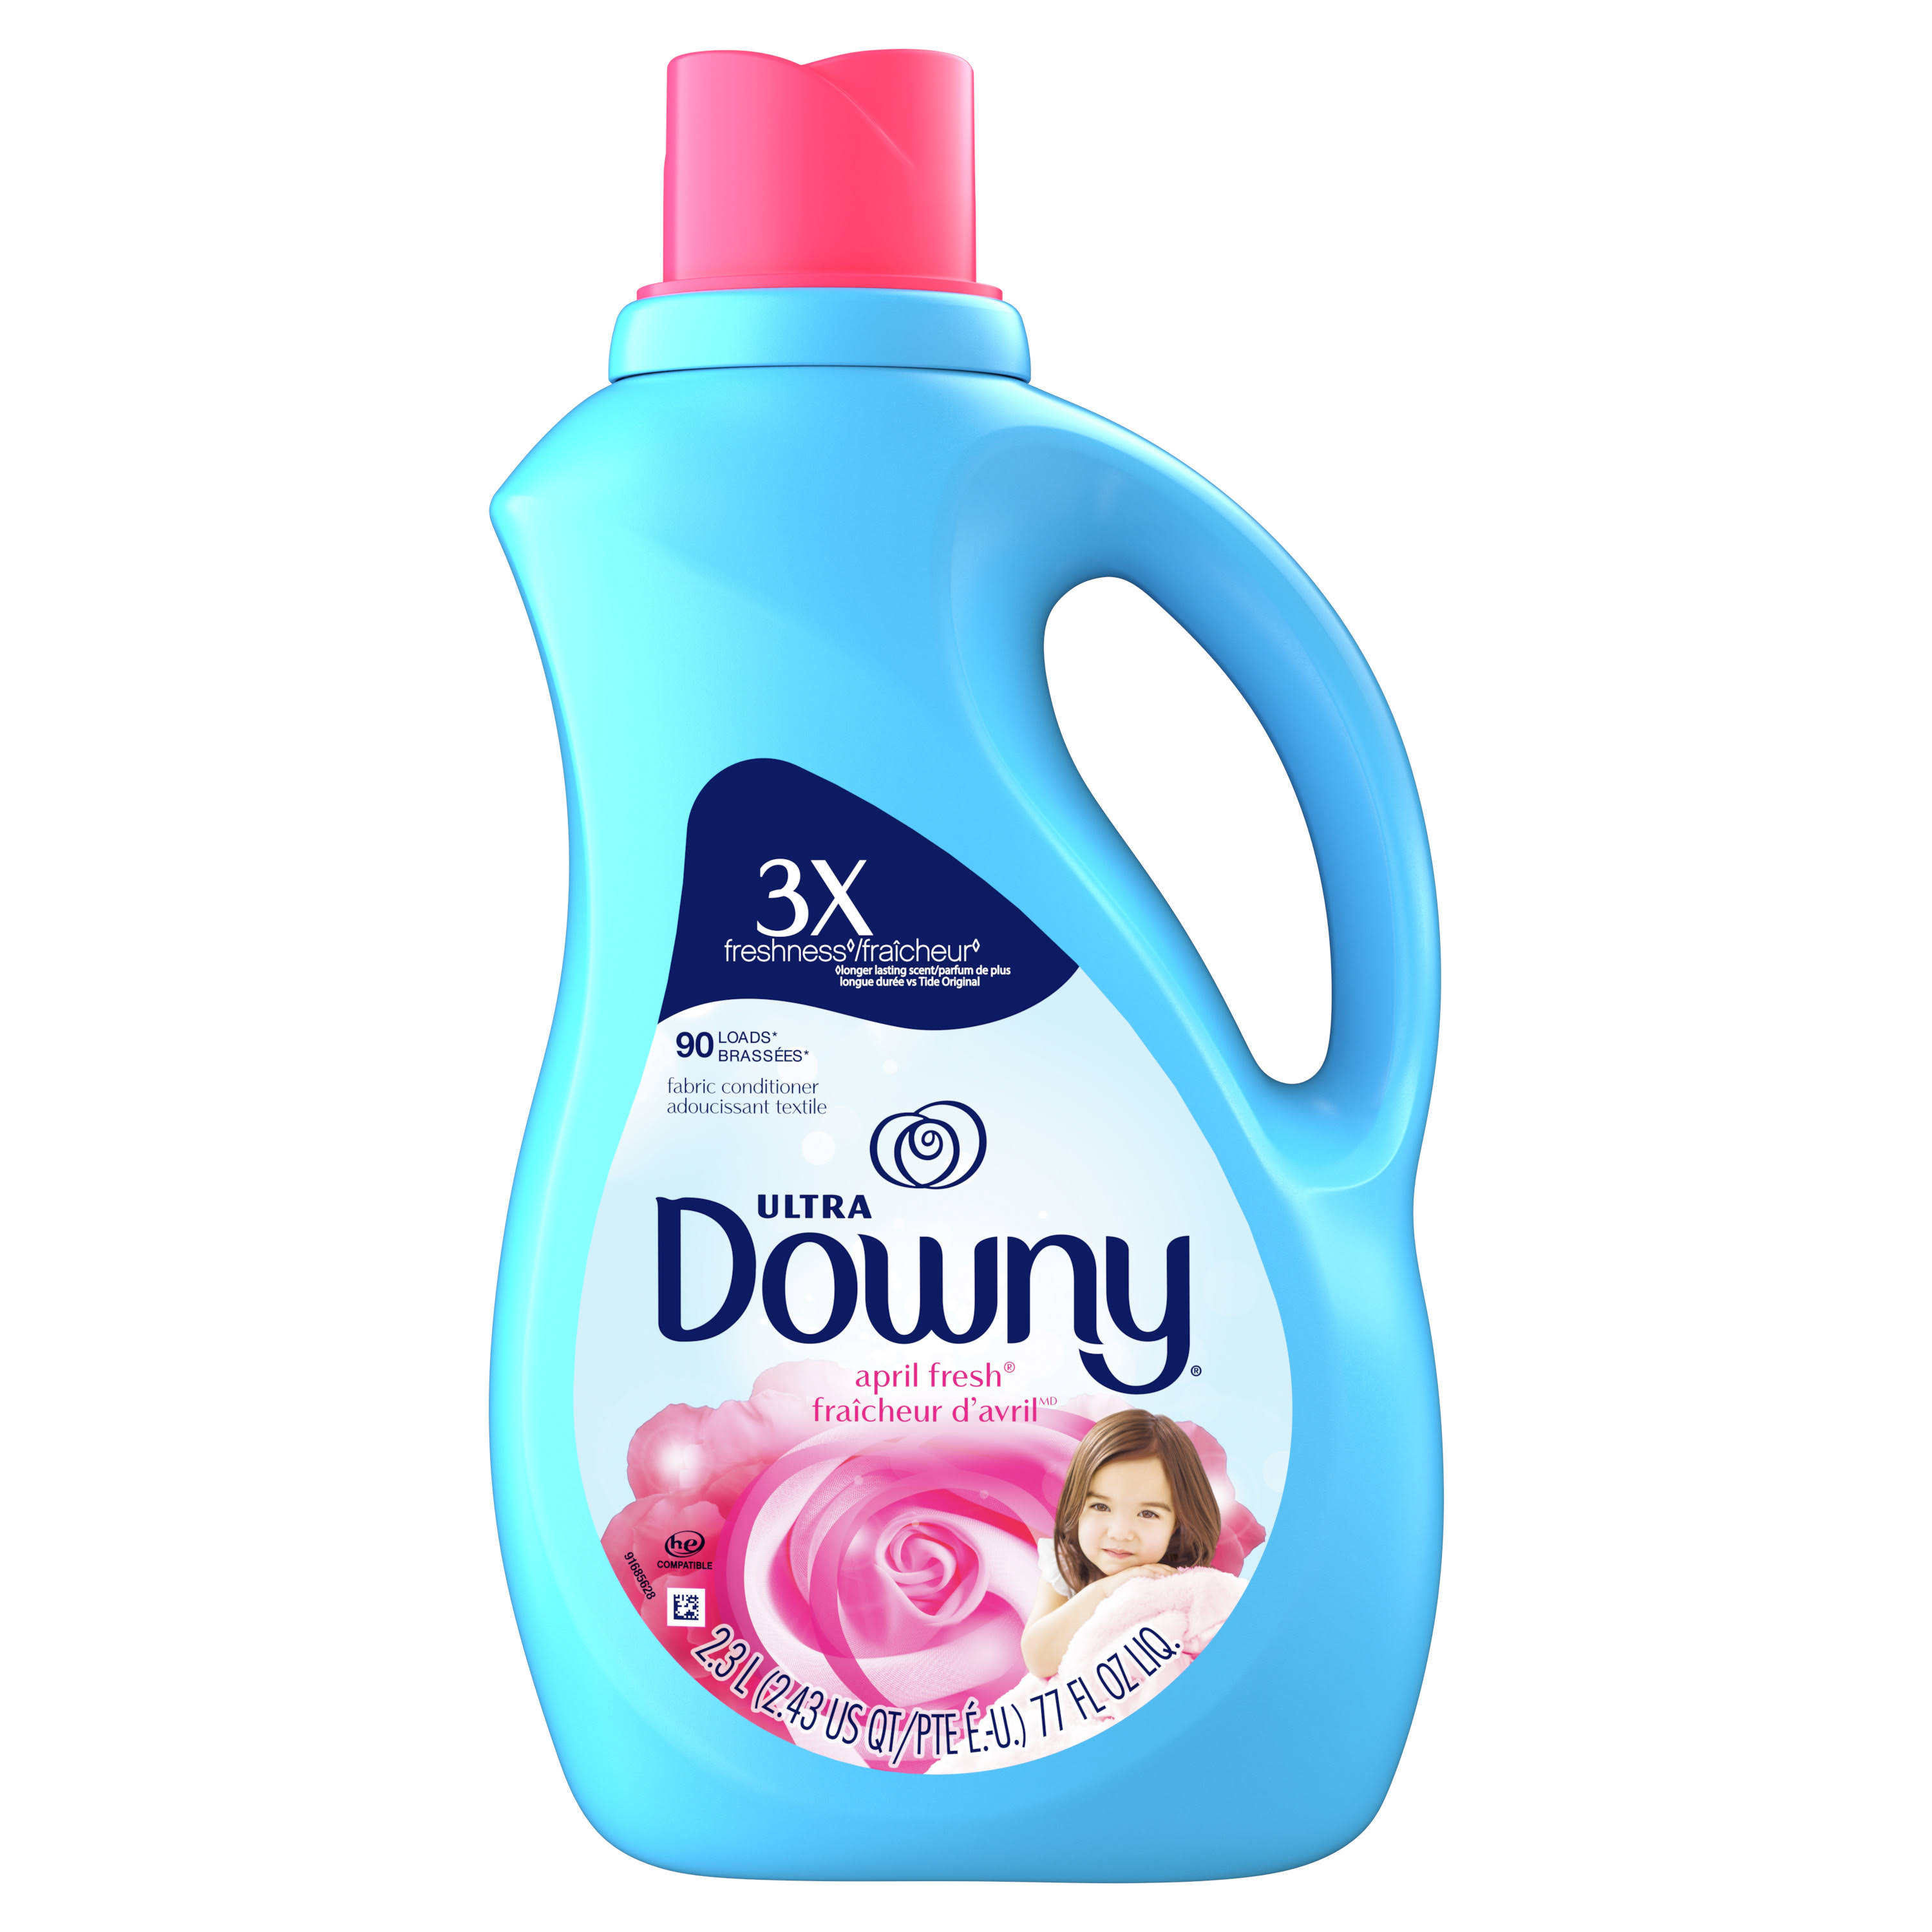 Downy Ultra Fabric Protect Fabric Conditioner - April Fresh, 90 Loads, 77oz